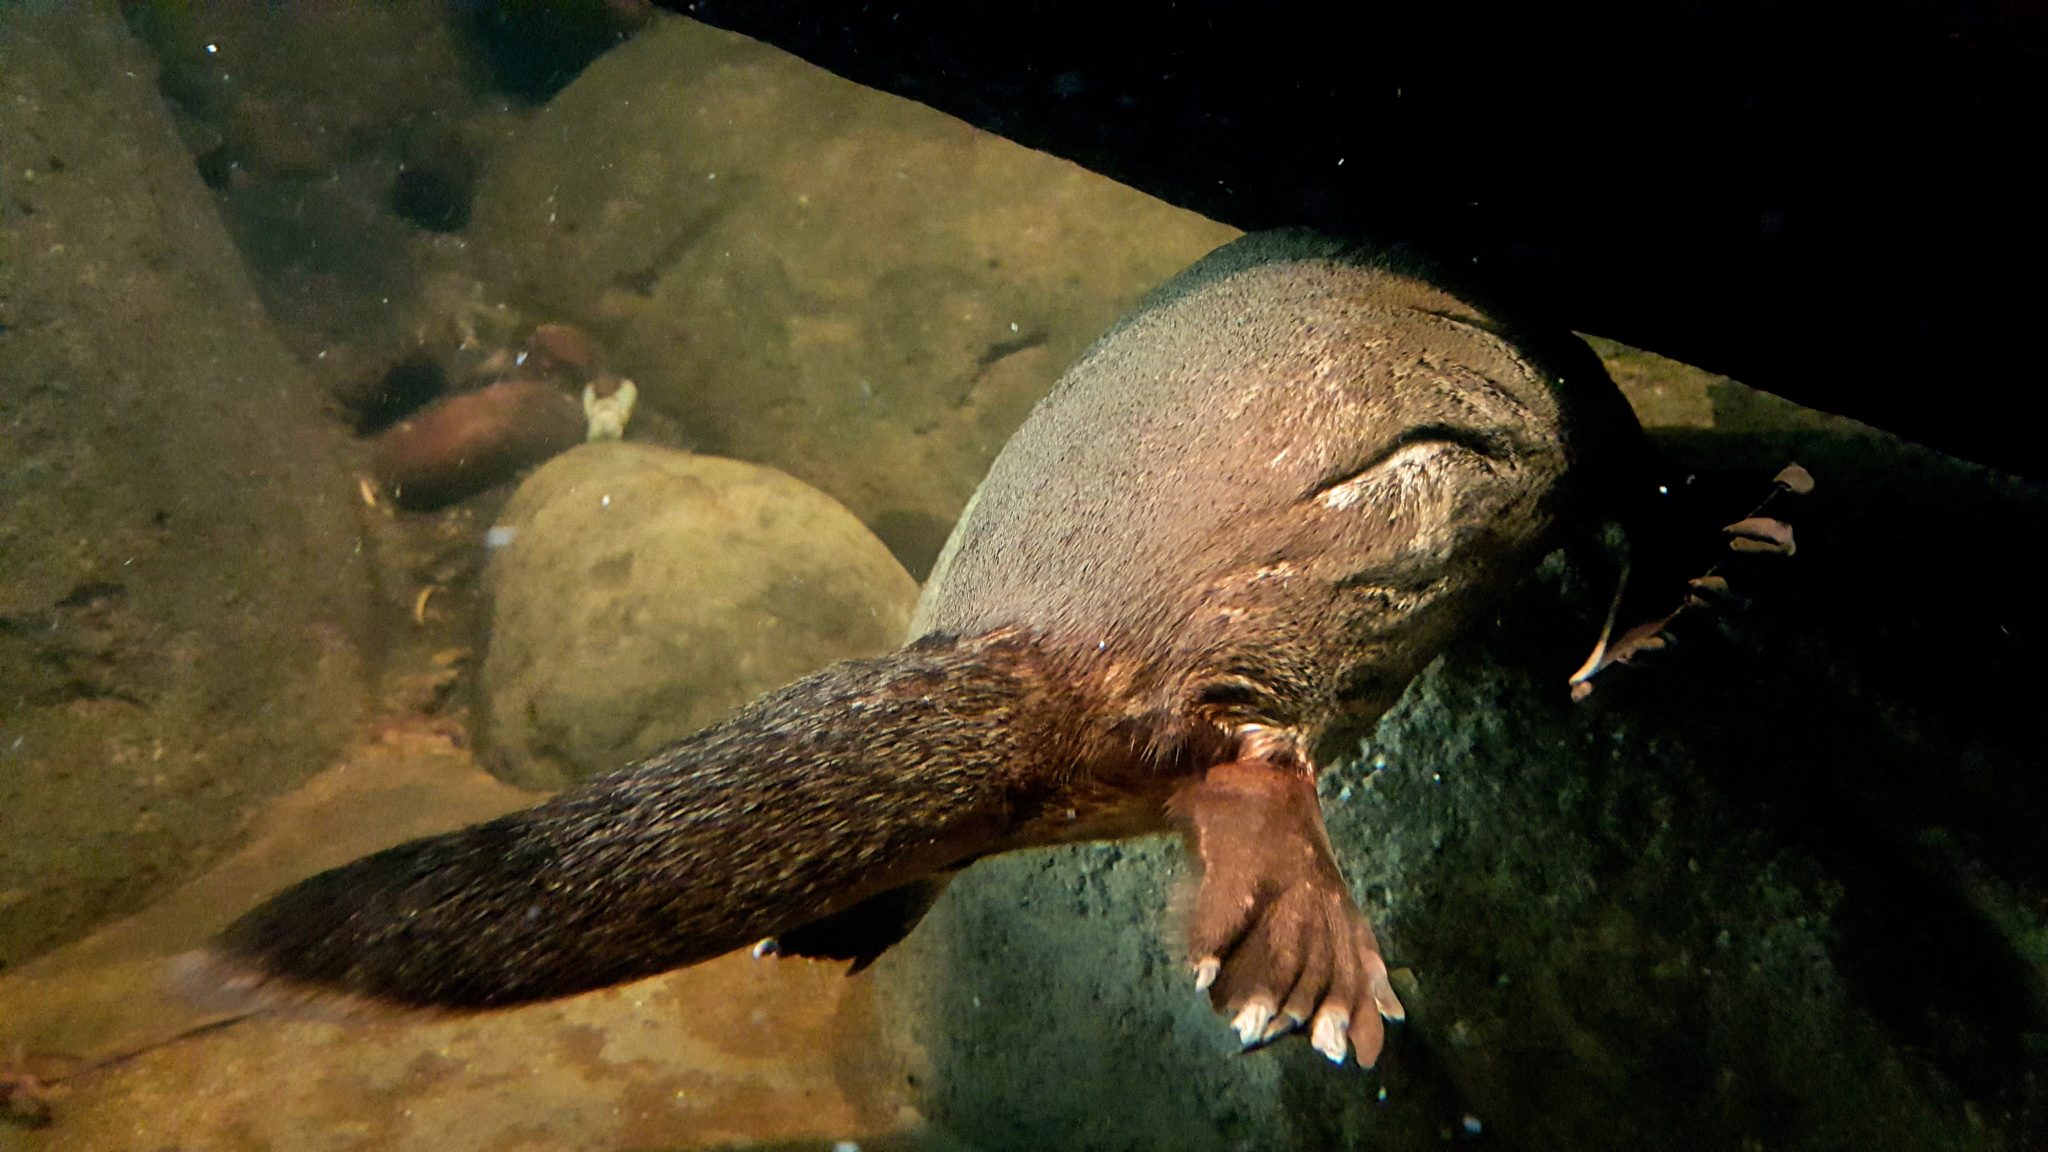 The platypus has webbed feet for swimming and a tail like a beaver.